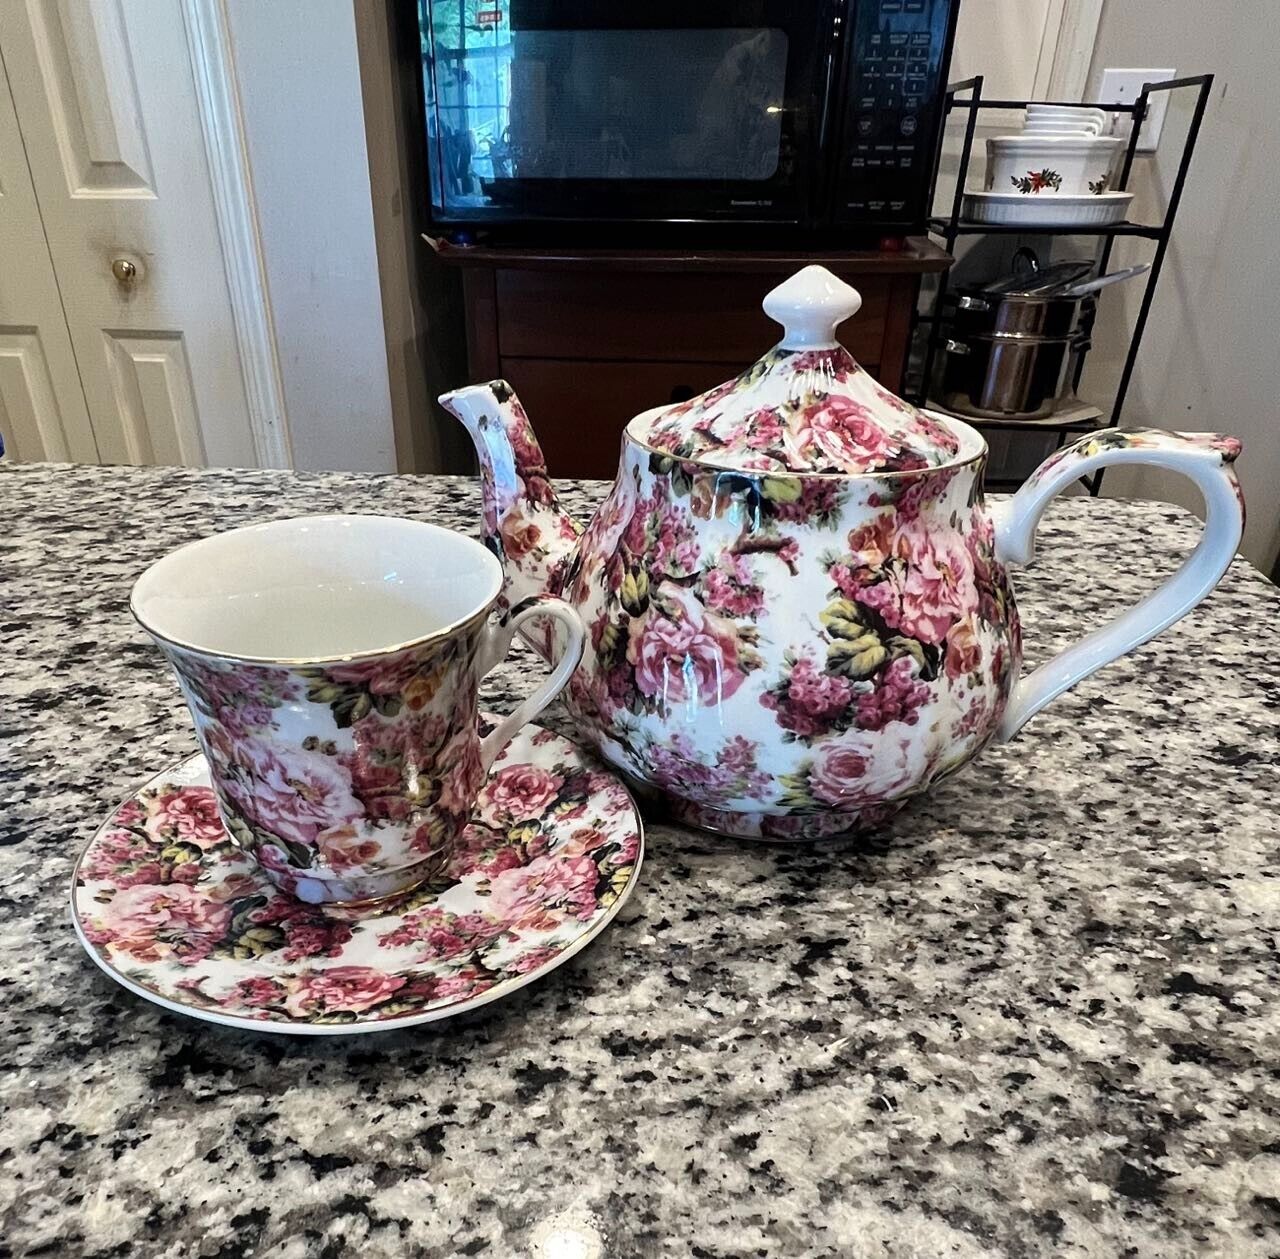 Darice Teacup And Saucer Roses Chintz & Teapot No Chips Or Cracks Clean